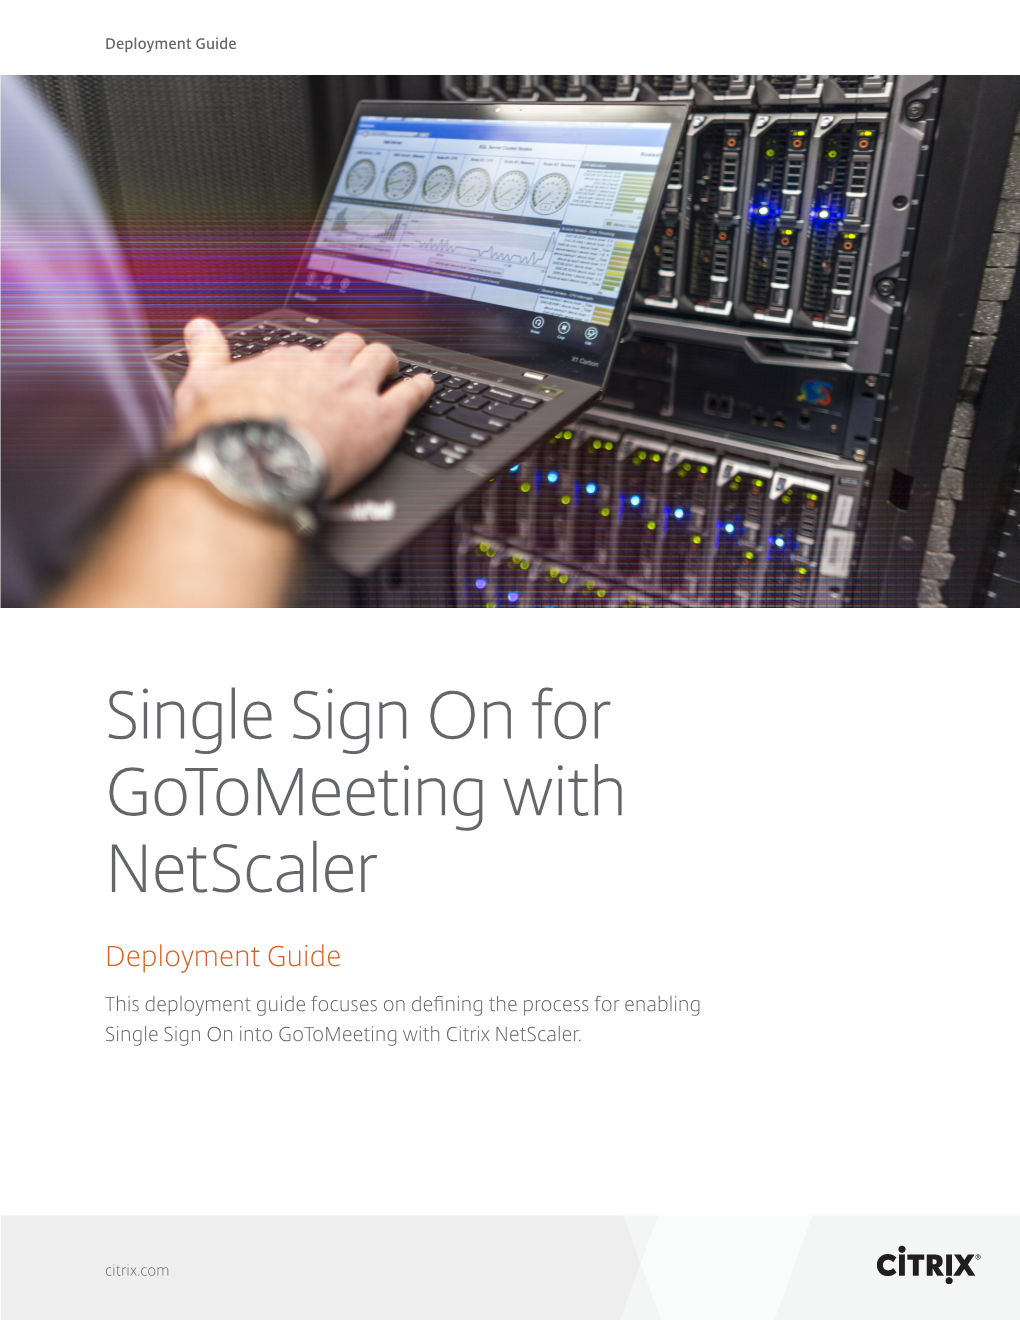 Single Sign on for Gotomeeting with Netscaler